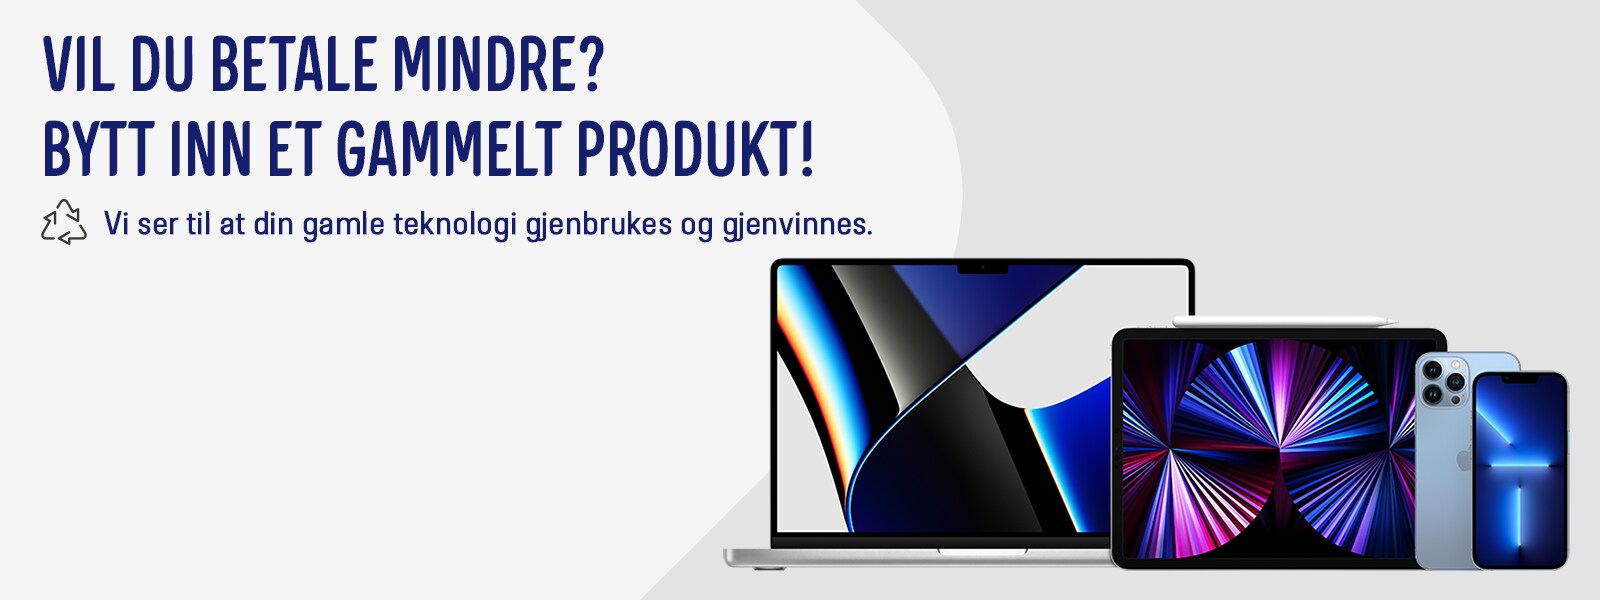 Apple products on banner with the text "Would you like to pay less? Trade in your old product"